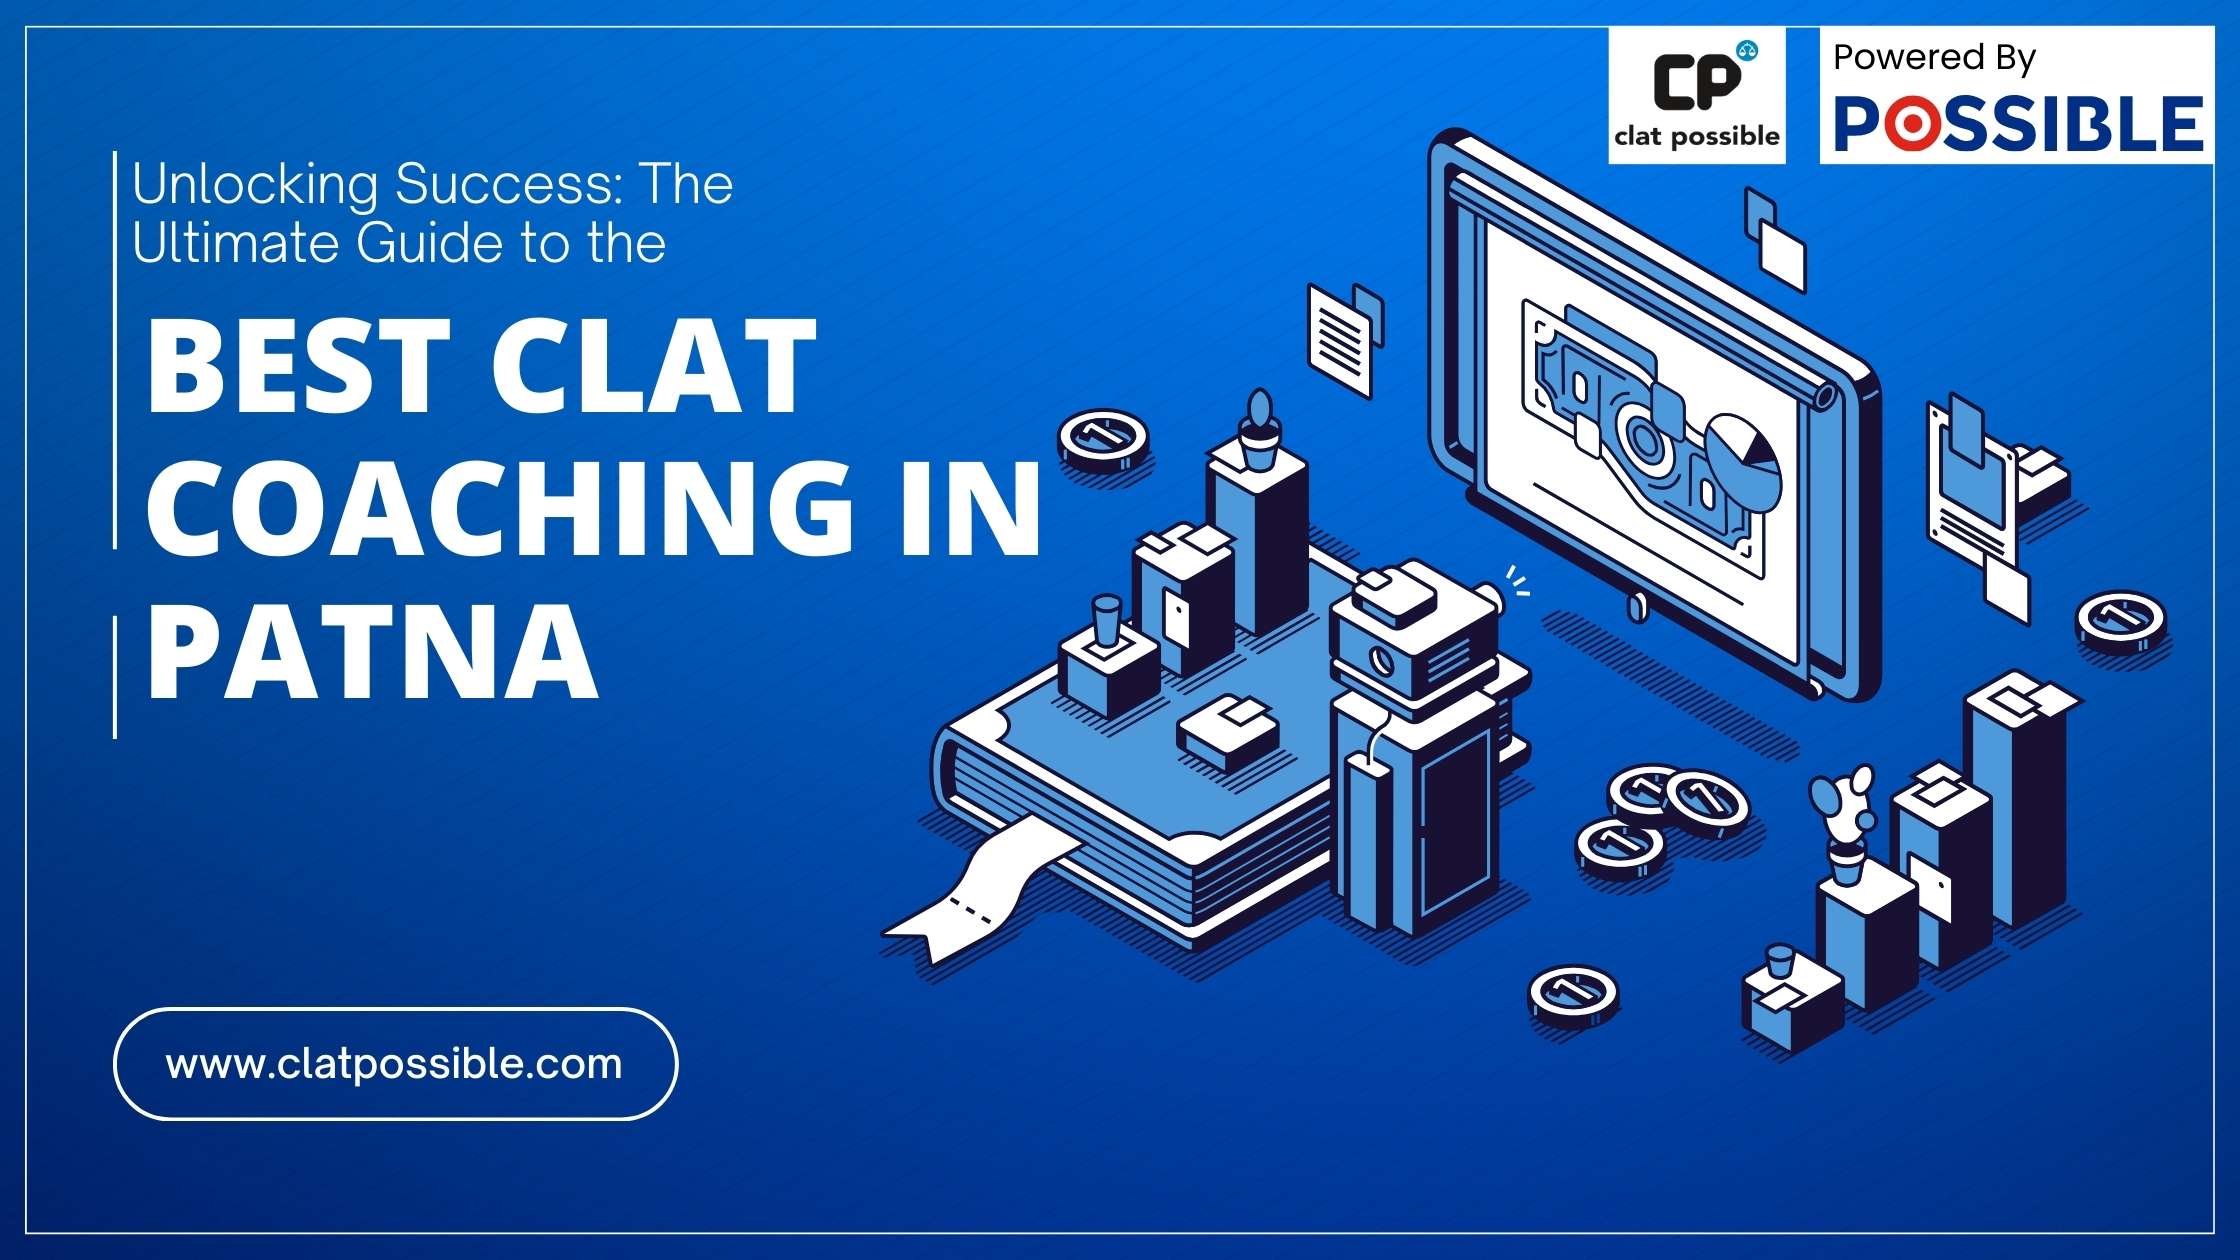 Unlocking Success: The Ultimate Guide to the Best CLAT Coaching in Patna